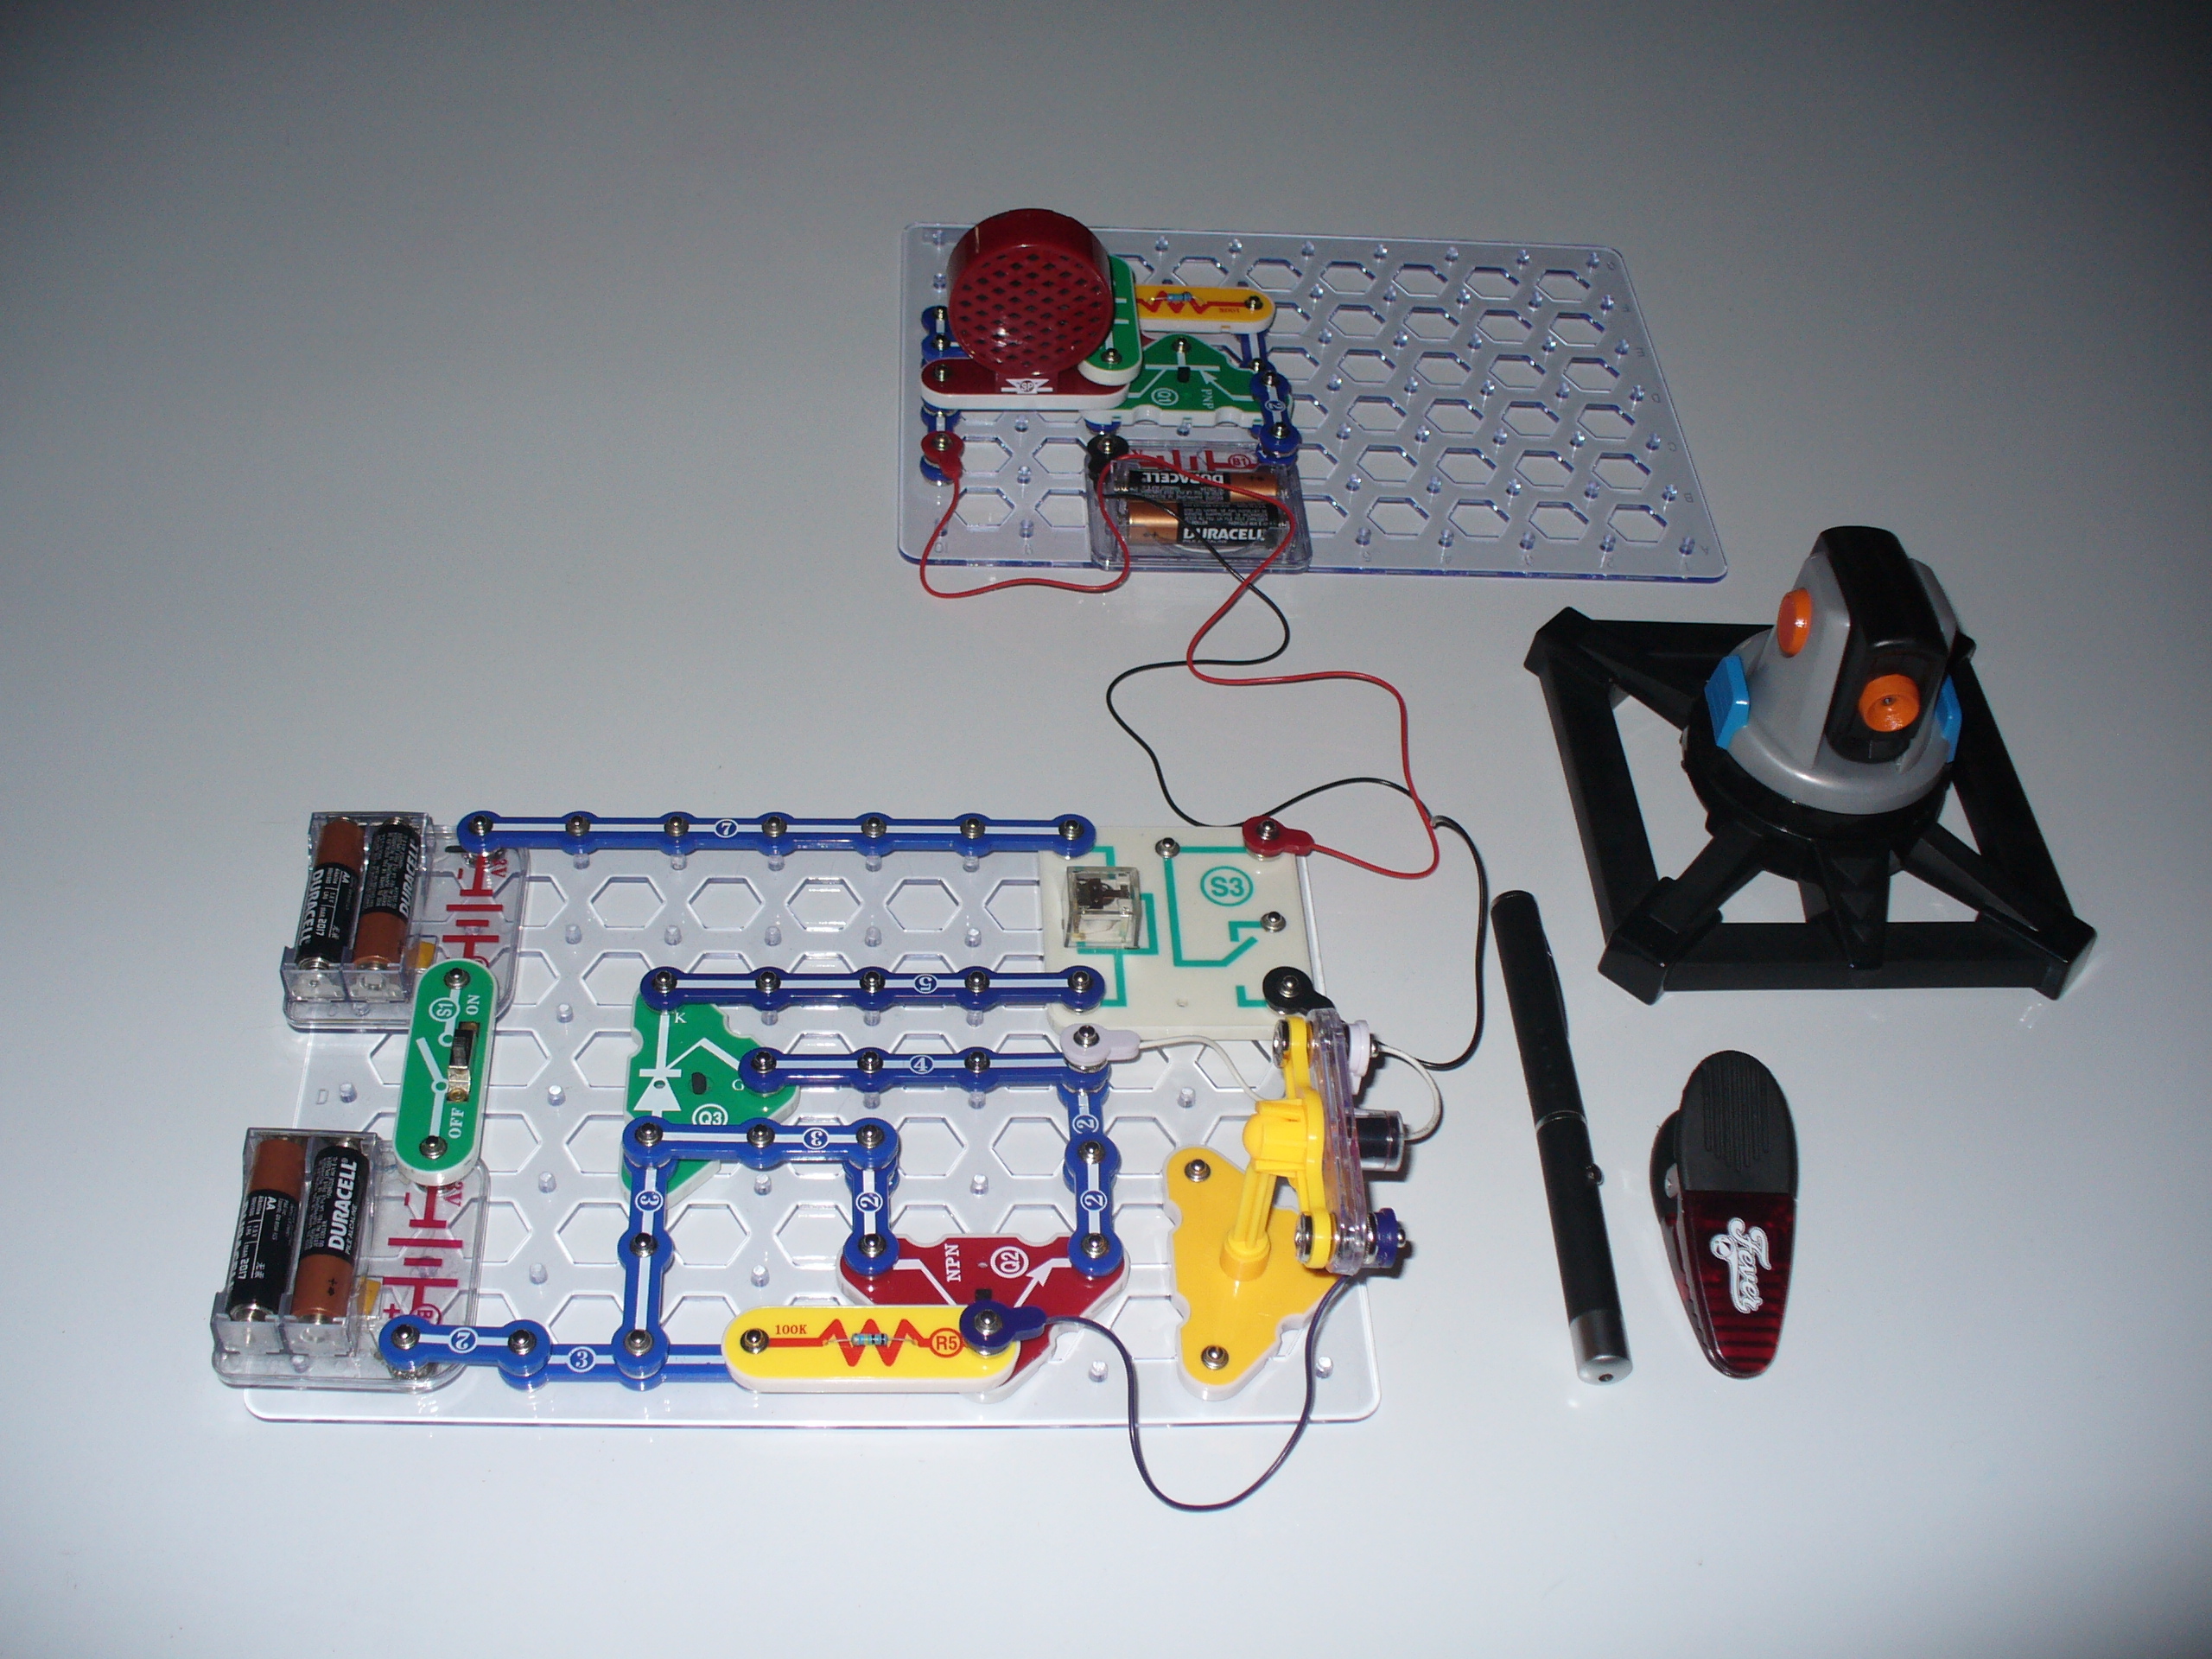 Laser Tripwire and Alarm Using Snap Circuits